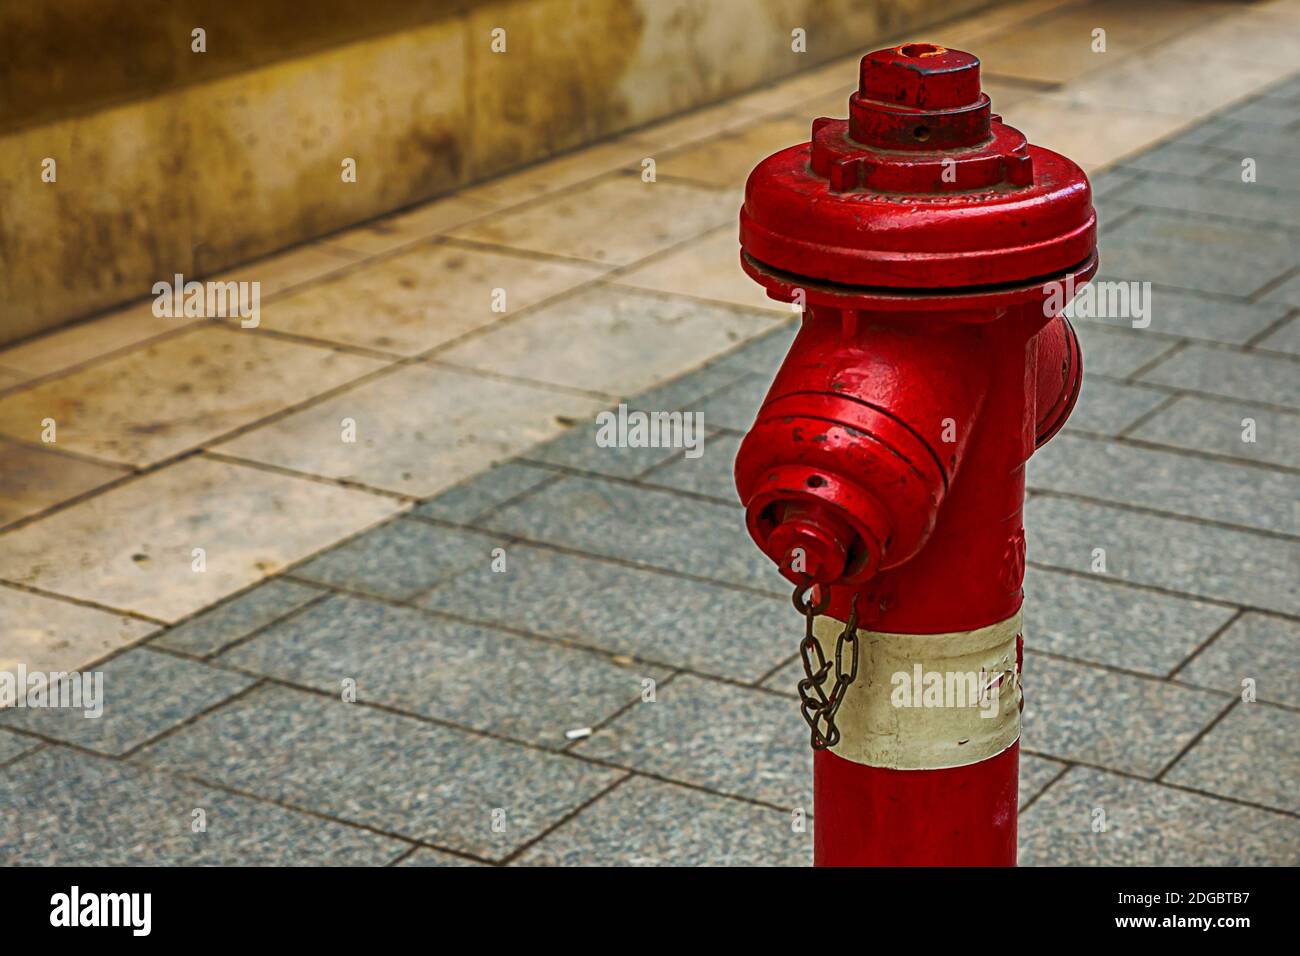 Fire hydrant red white protection of the city on a background of gray tiles urban design Stock Photo